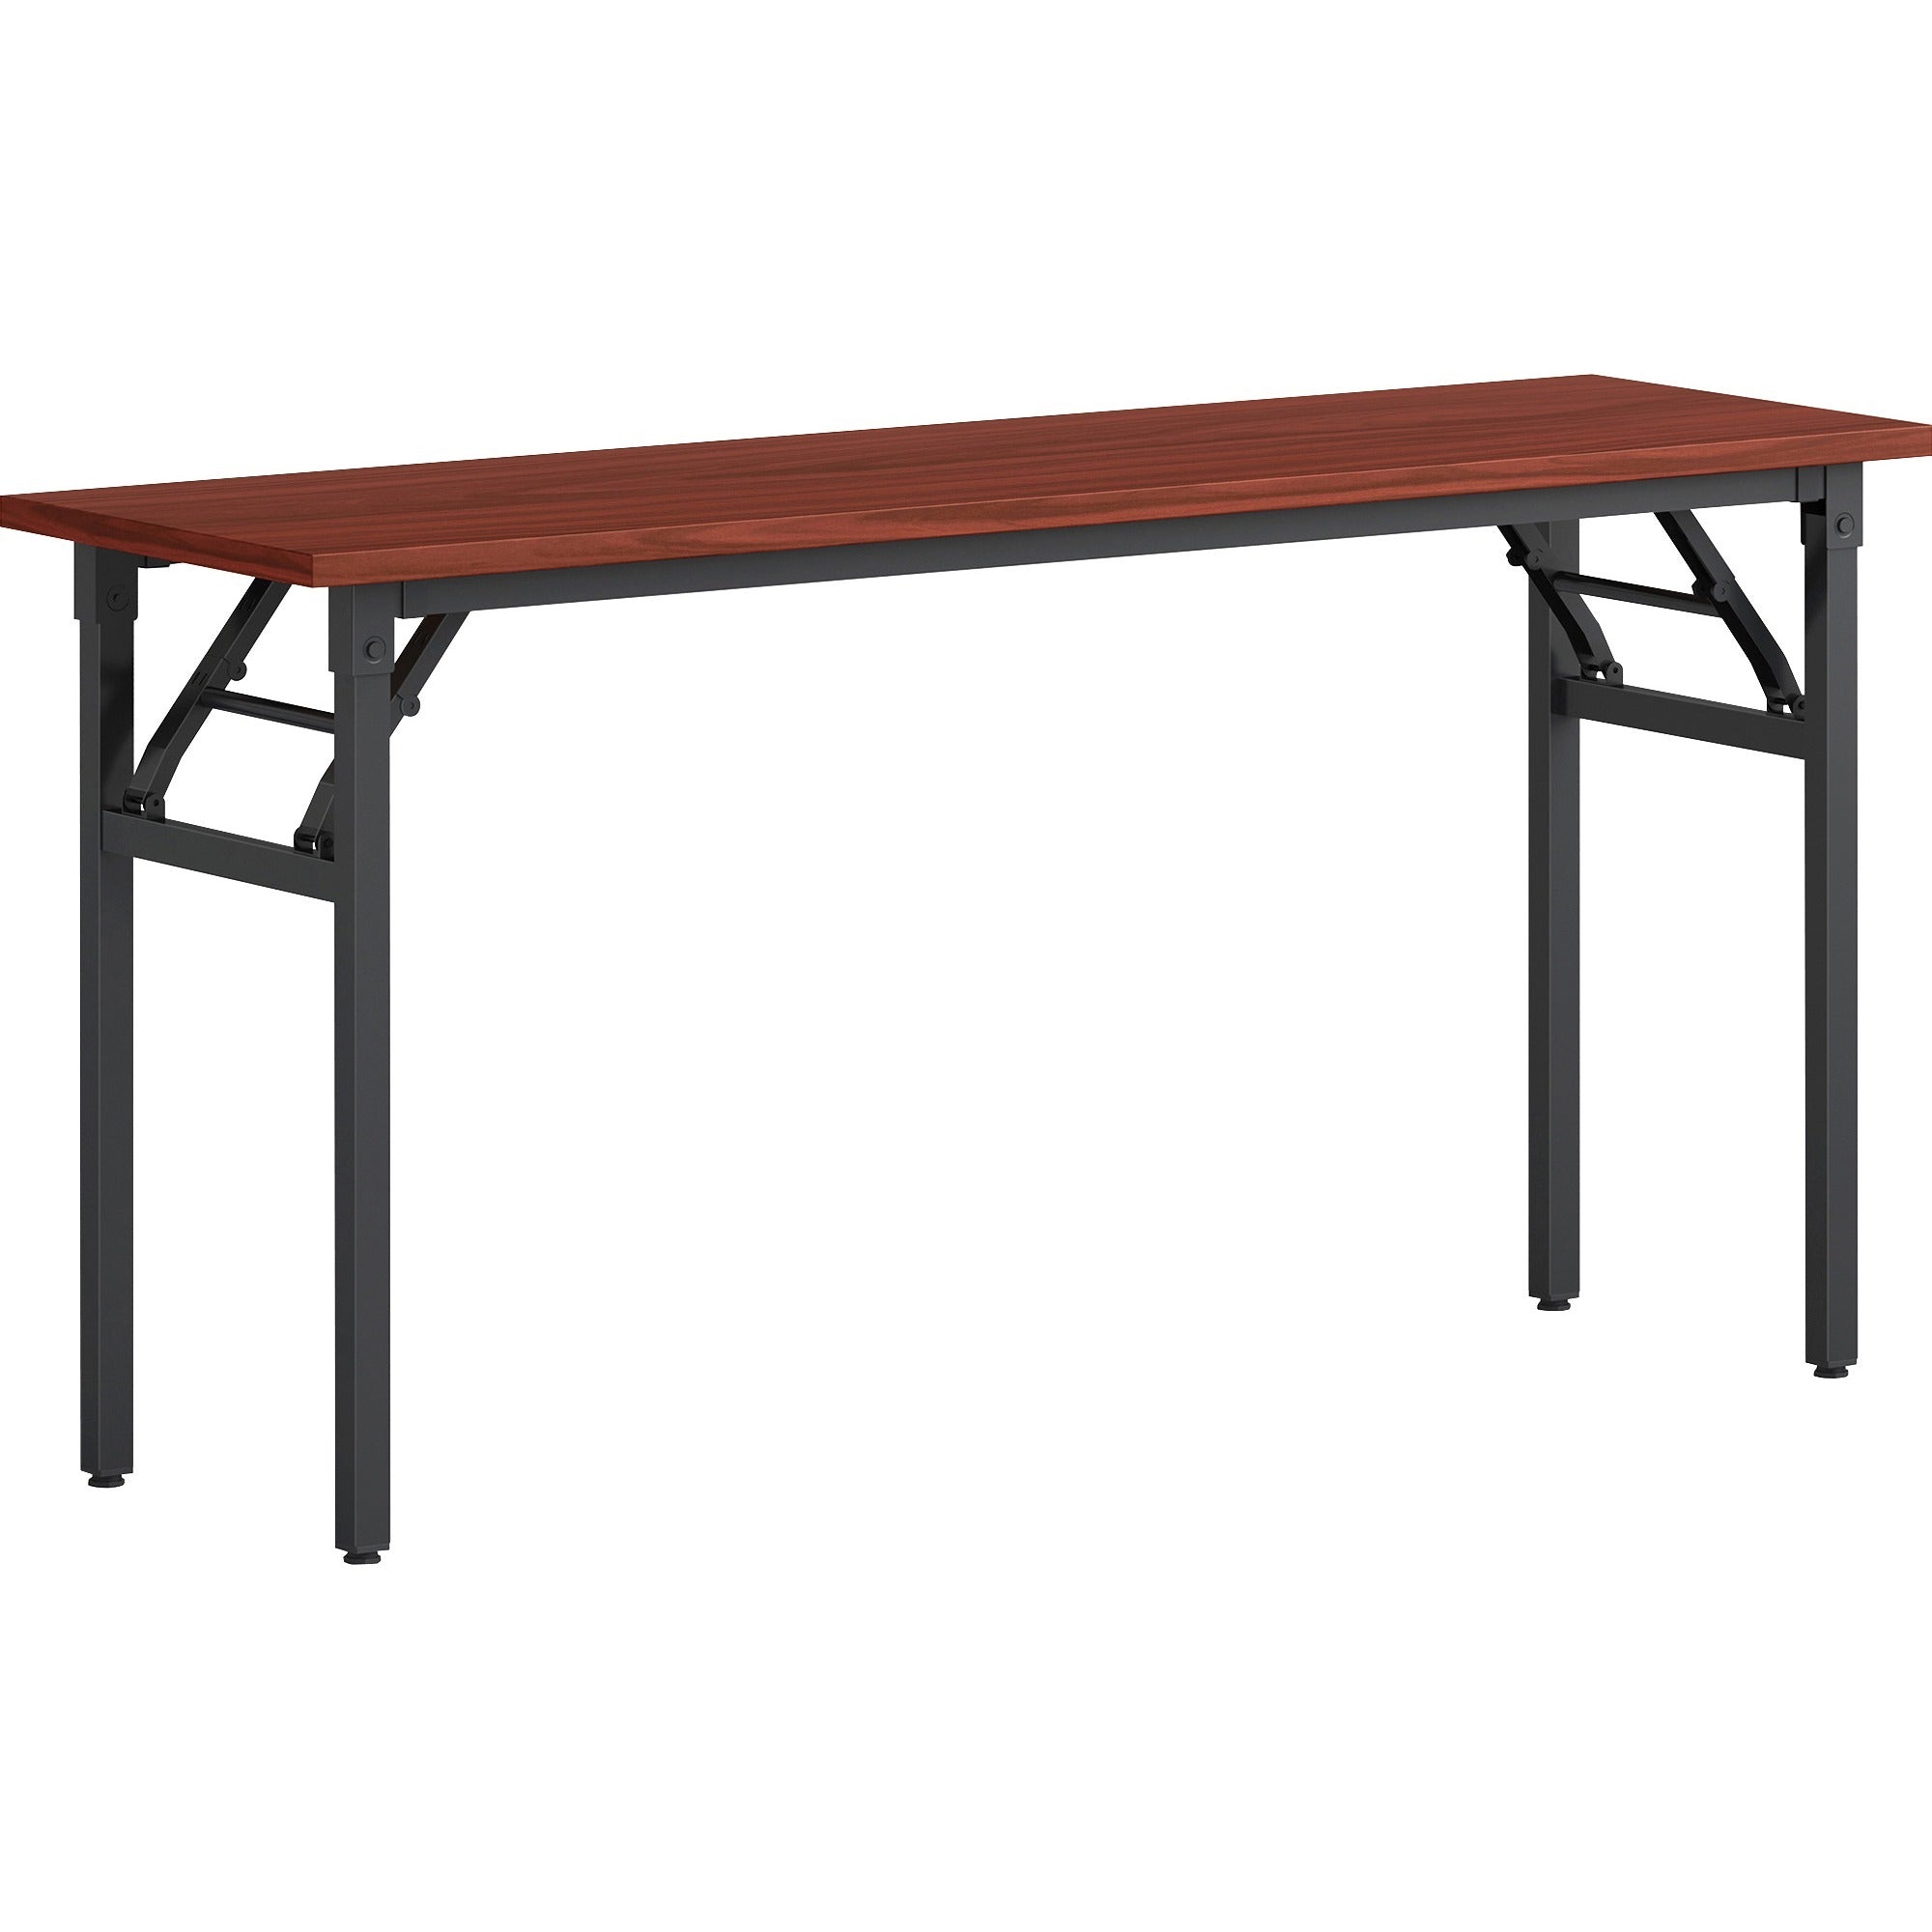 lorell-folding-training-table-for-table-topmelamine-top-x-60-table-top-width-x-18-table-top-depth-x-1-table-top-thickness-30-height-assembly-required-mahogany-1-each_llr60747 - 1